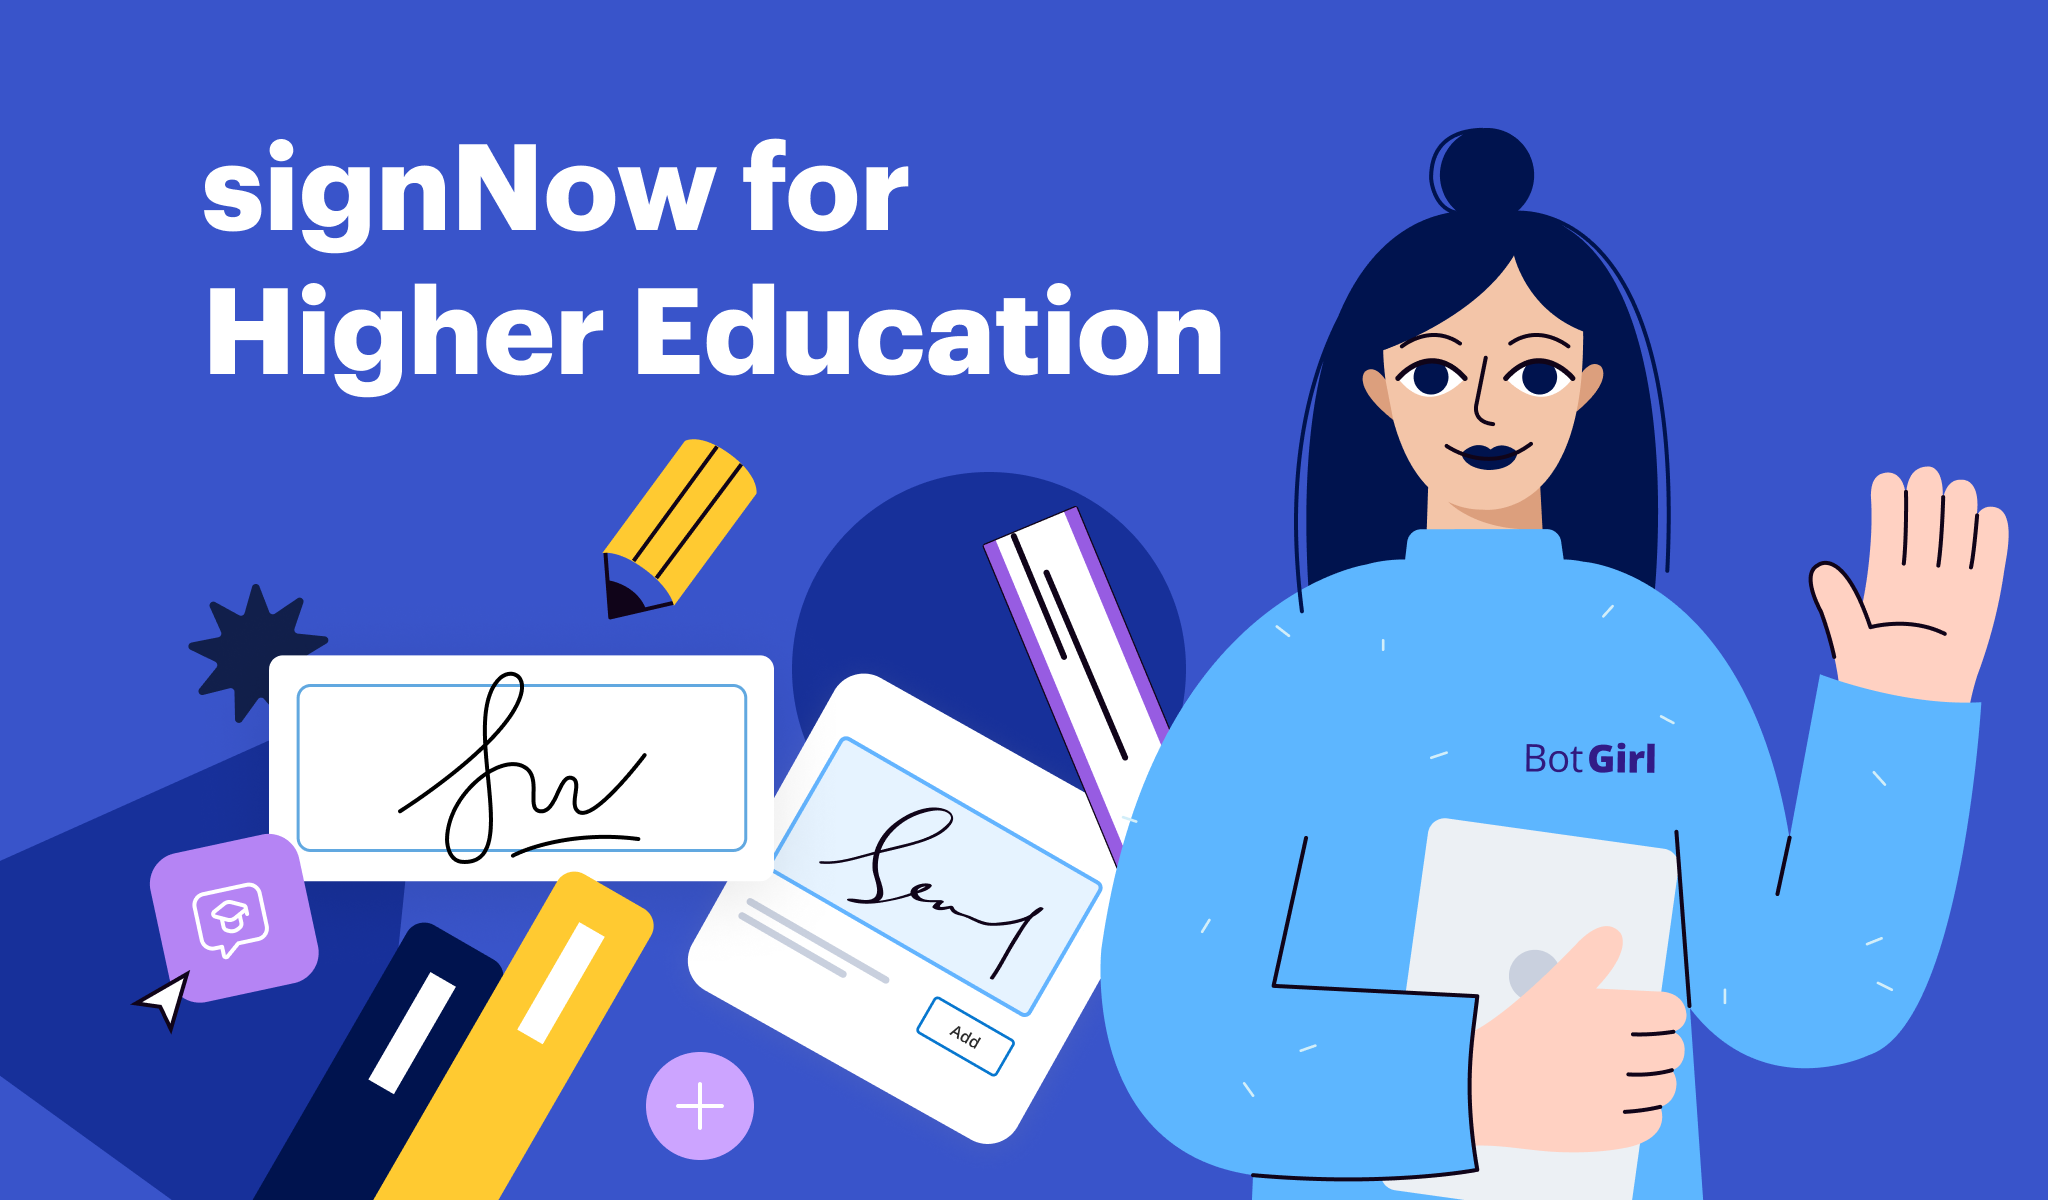 All you need to know about signNow’s eSignature solution for higher education